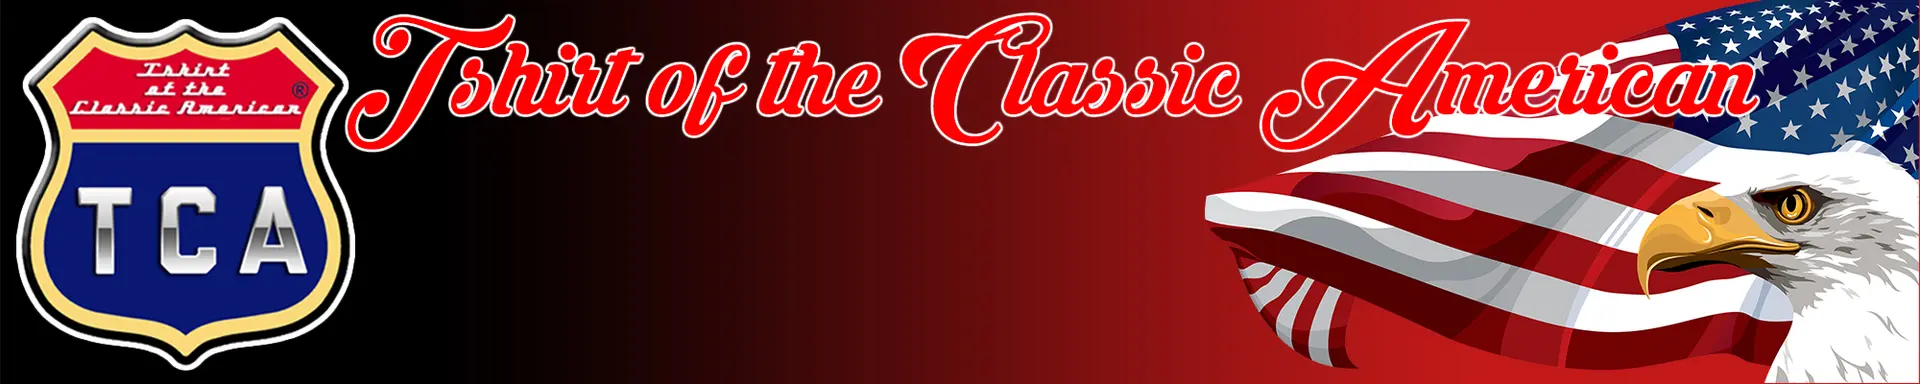 Banner for Tshirt of the Classic American